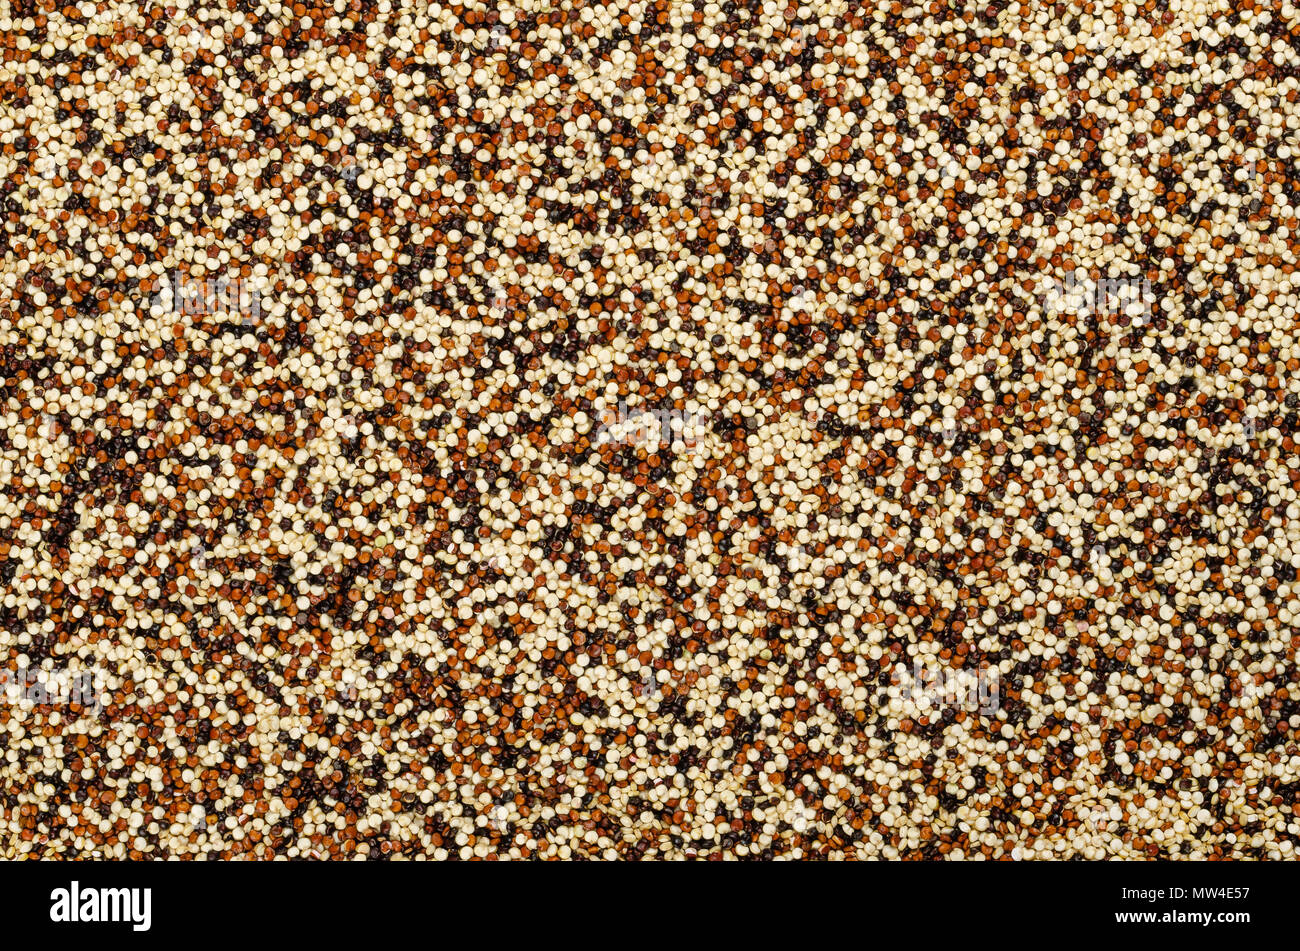 Mixed quinoa seeds, surface and background. Pseudocereal. Yellow, red and black edible fruits of grain crop Chenopodium quinoa. Macro food photo. Stock Photo